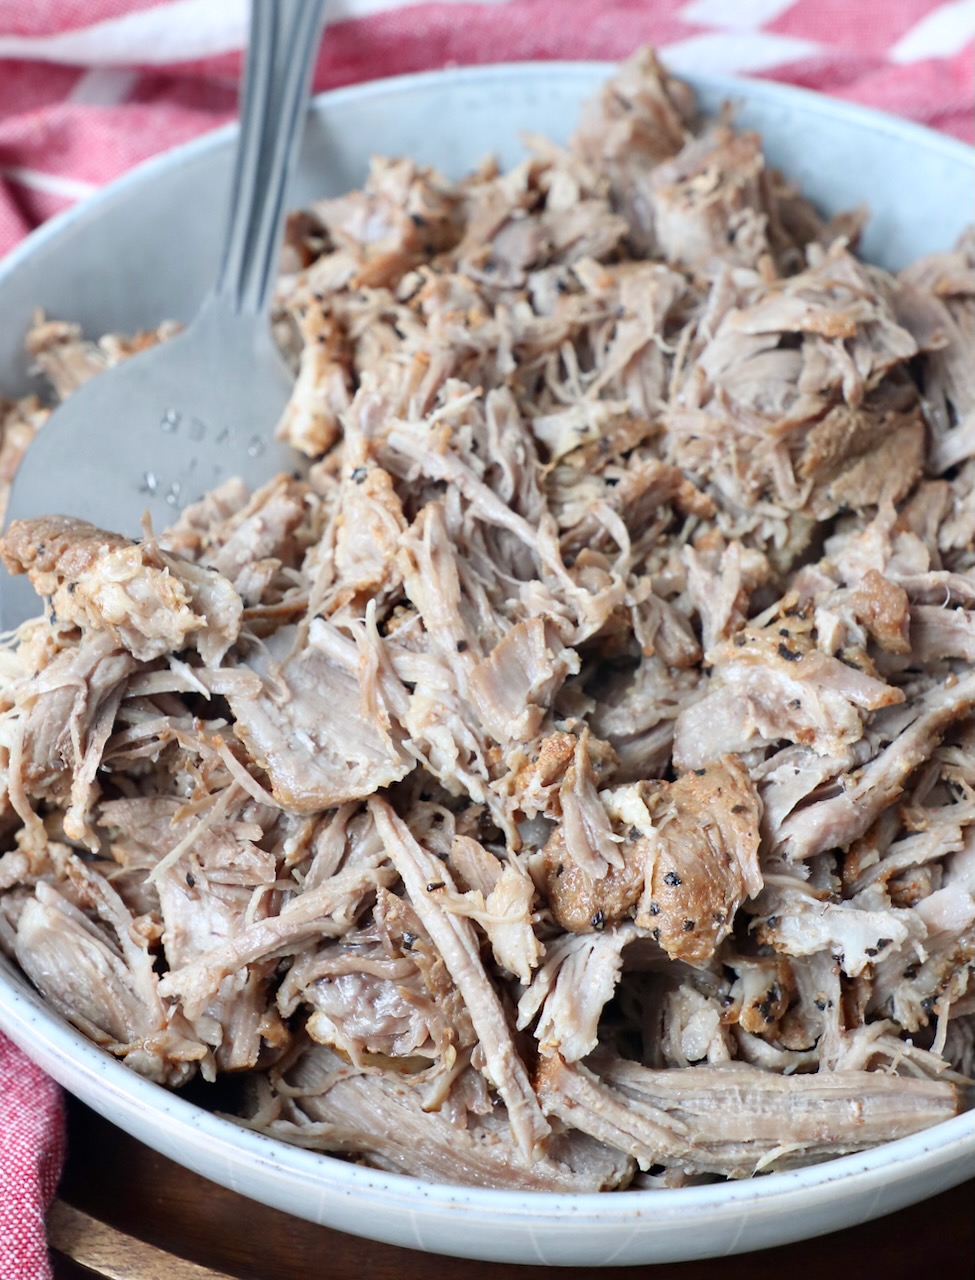 pulled pork in a bowl with large serving fork